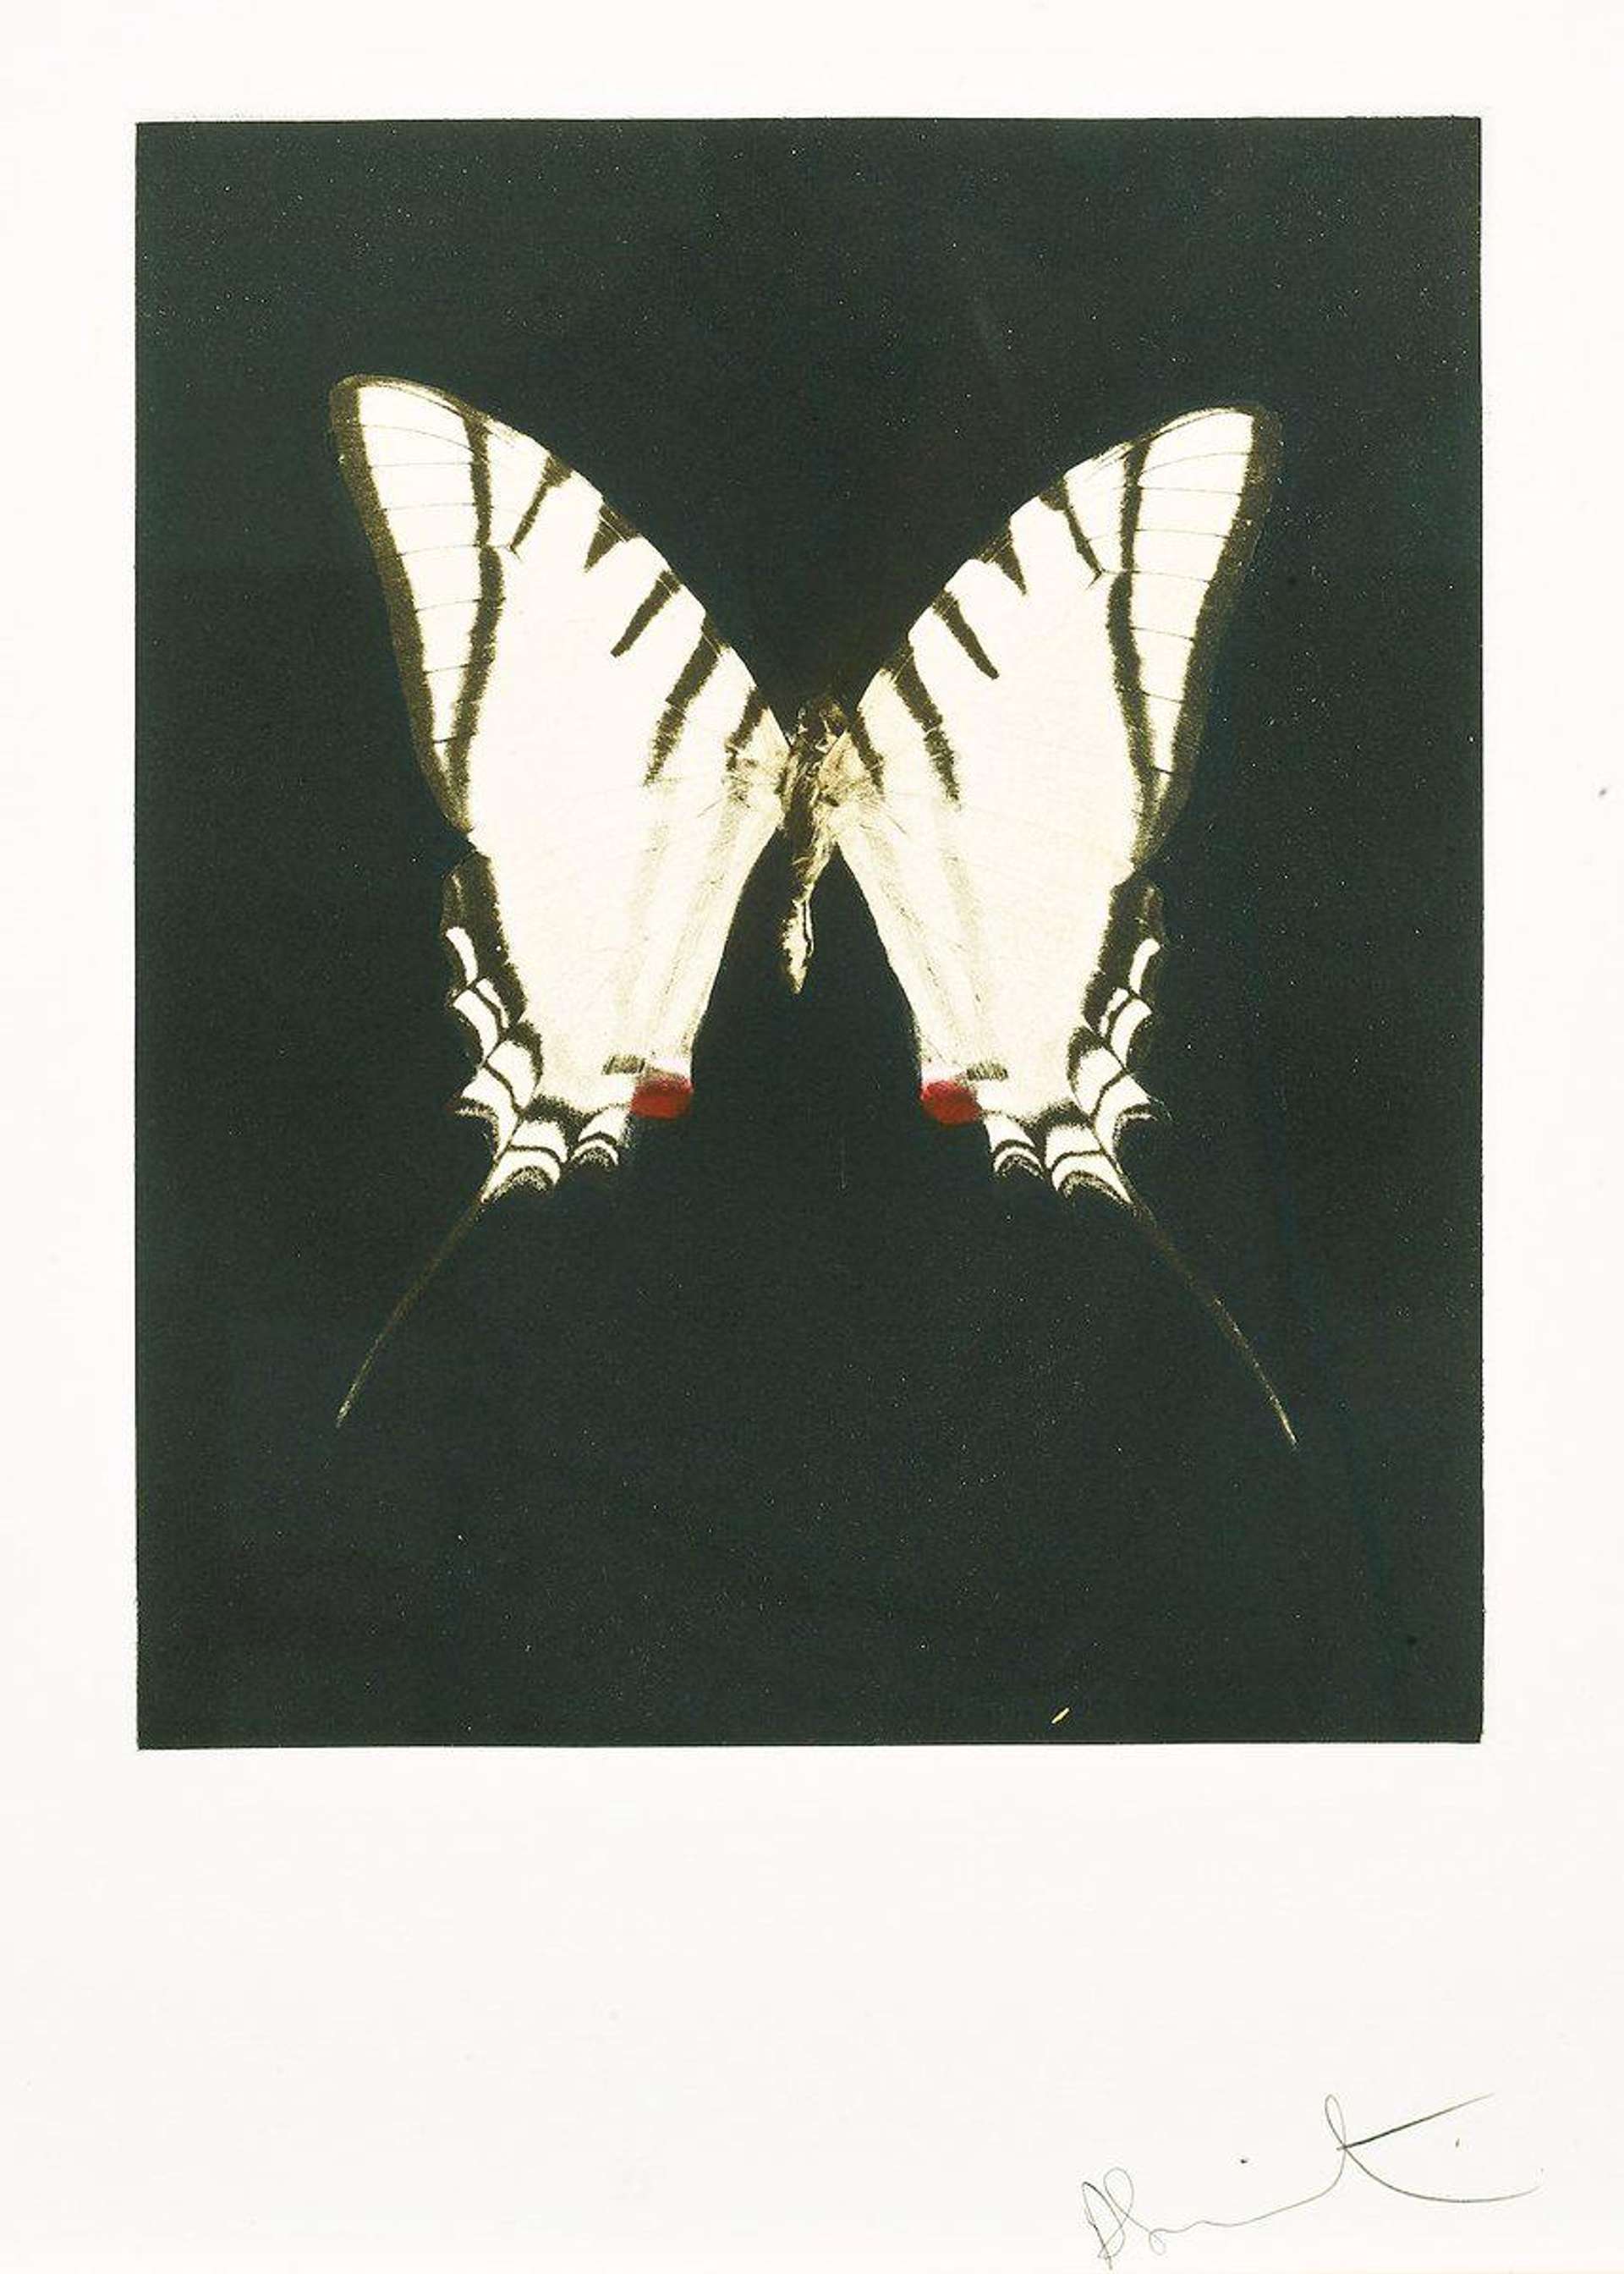 An etching by Damien Hirst depicting a white butterfly with black markings, set against a dark background